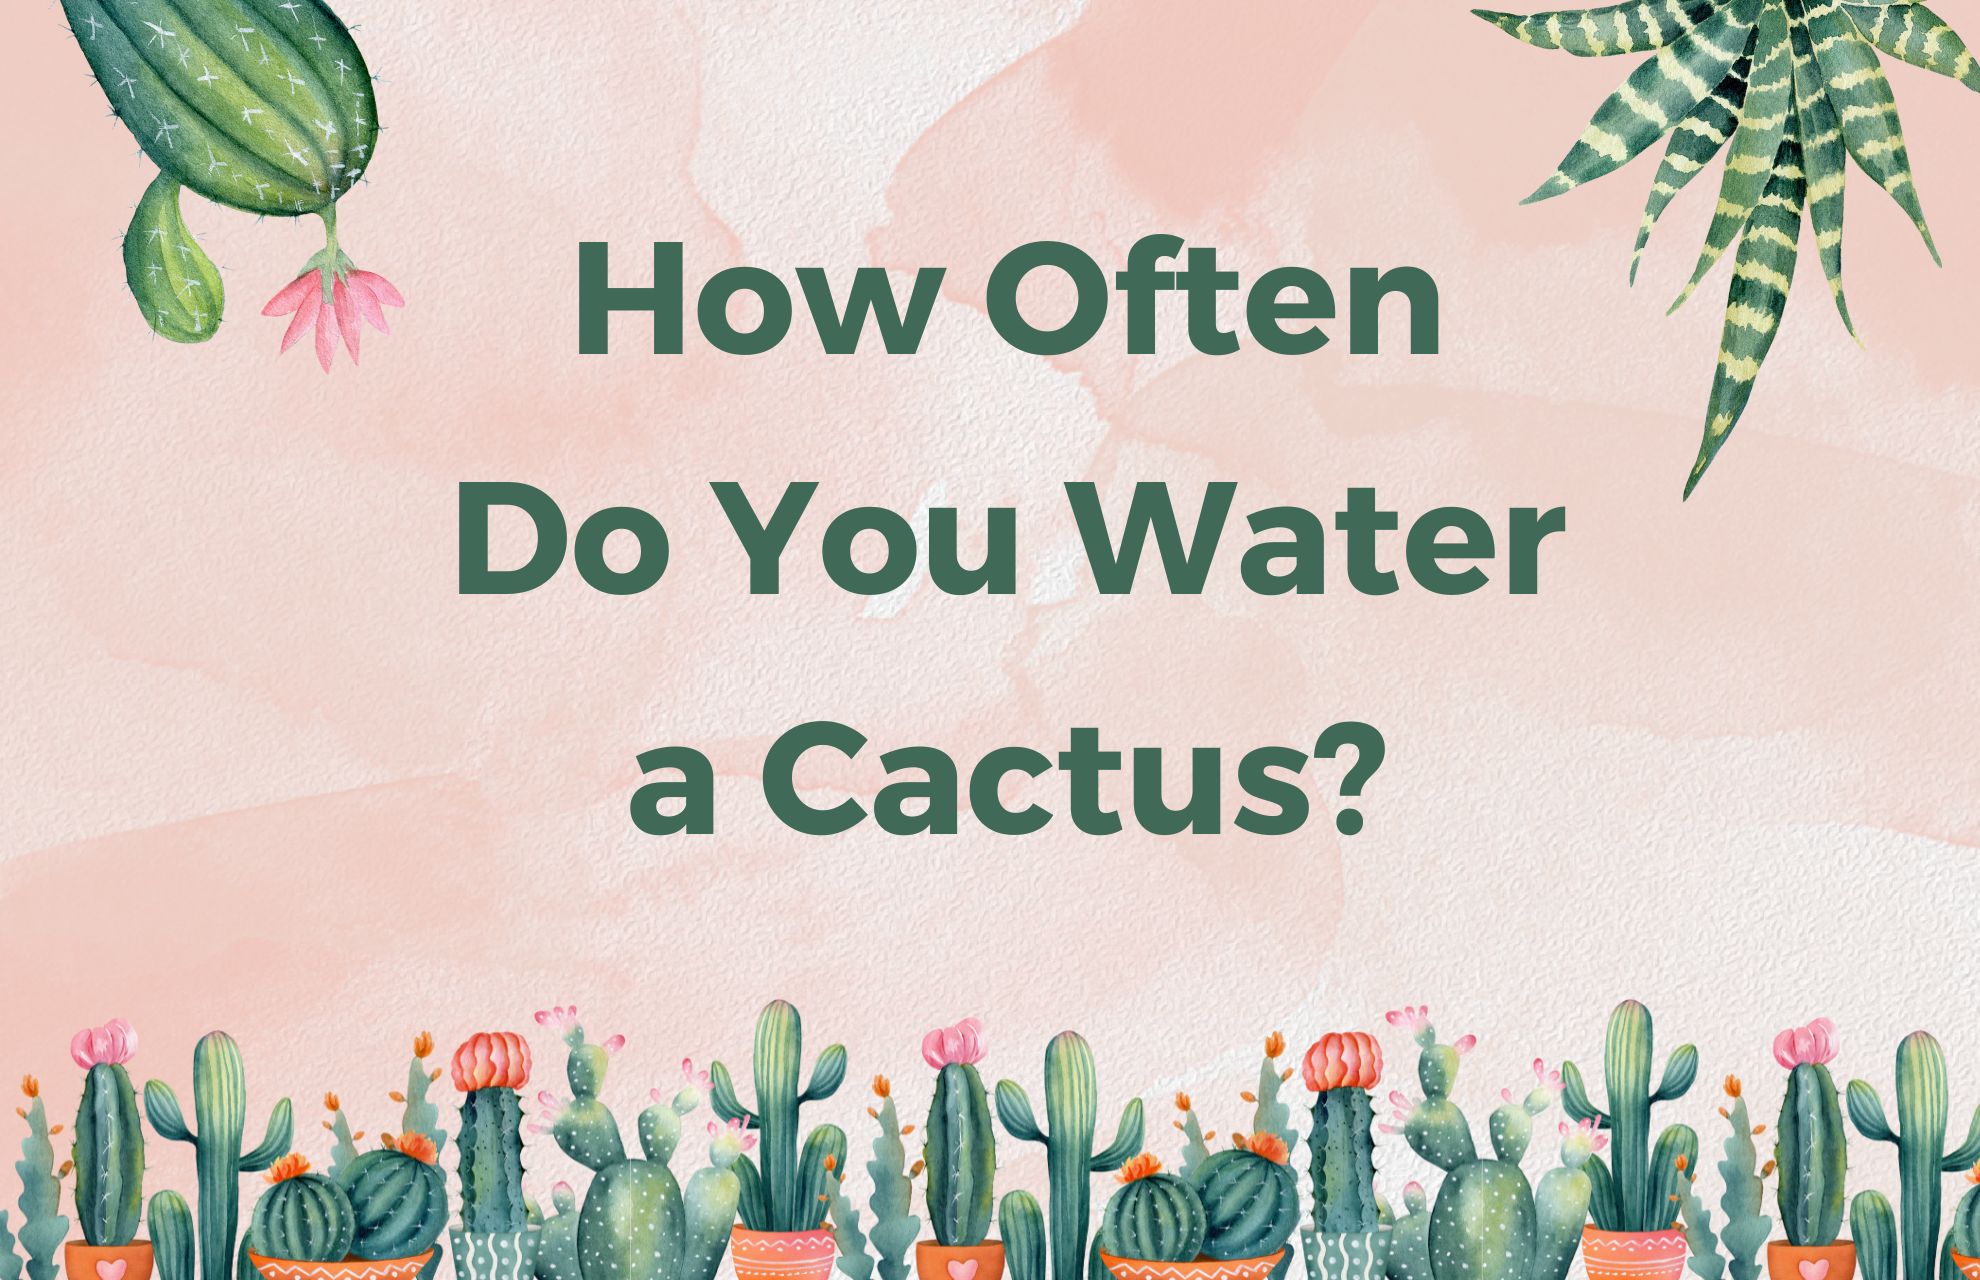 How Often Do You Water a Cactus